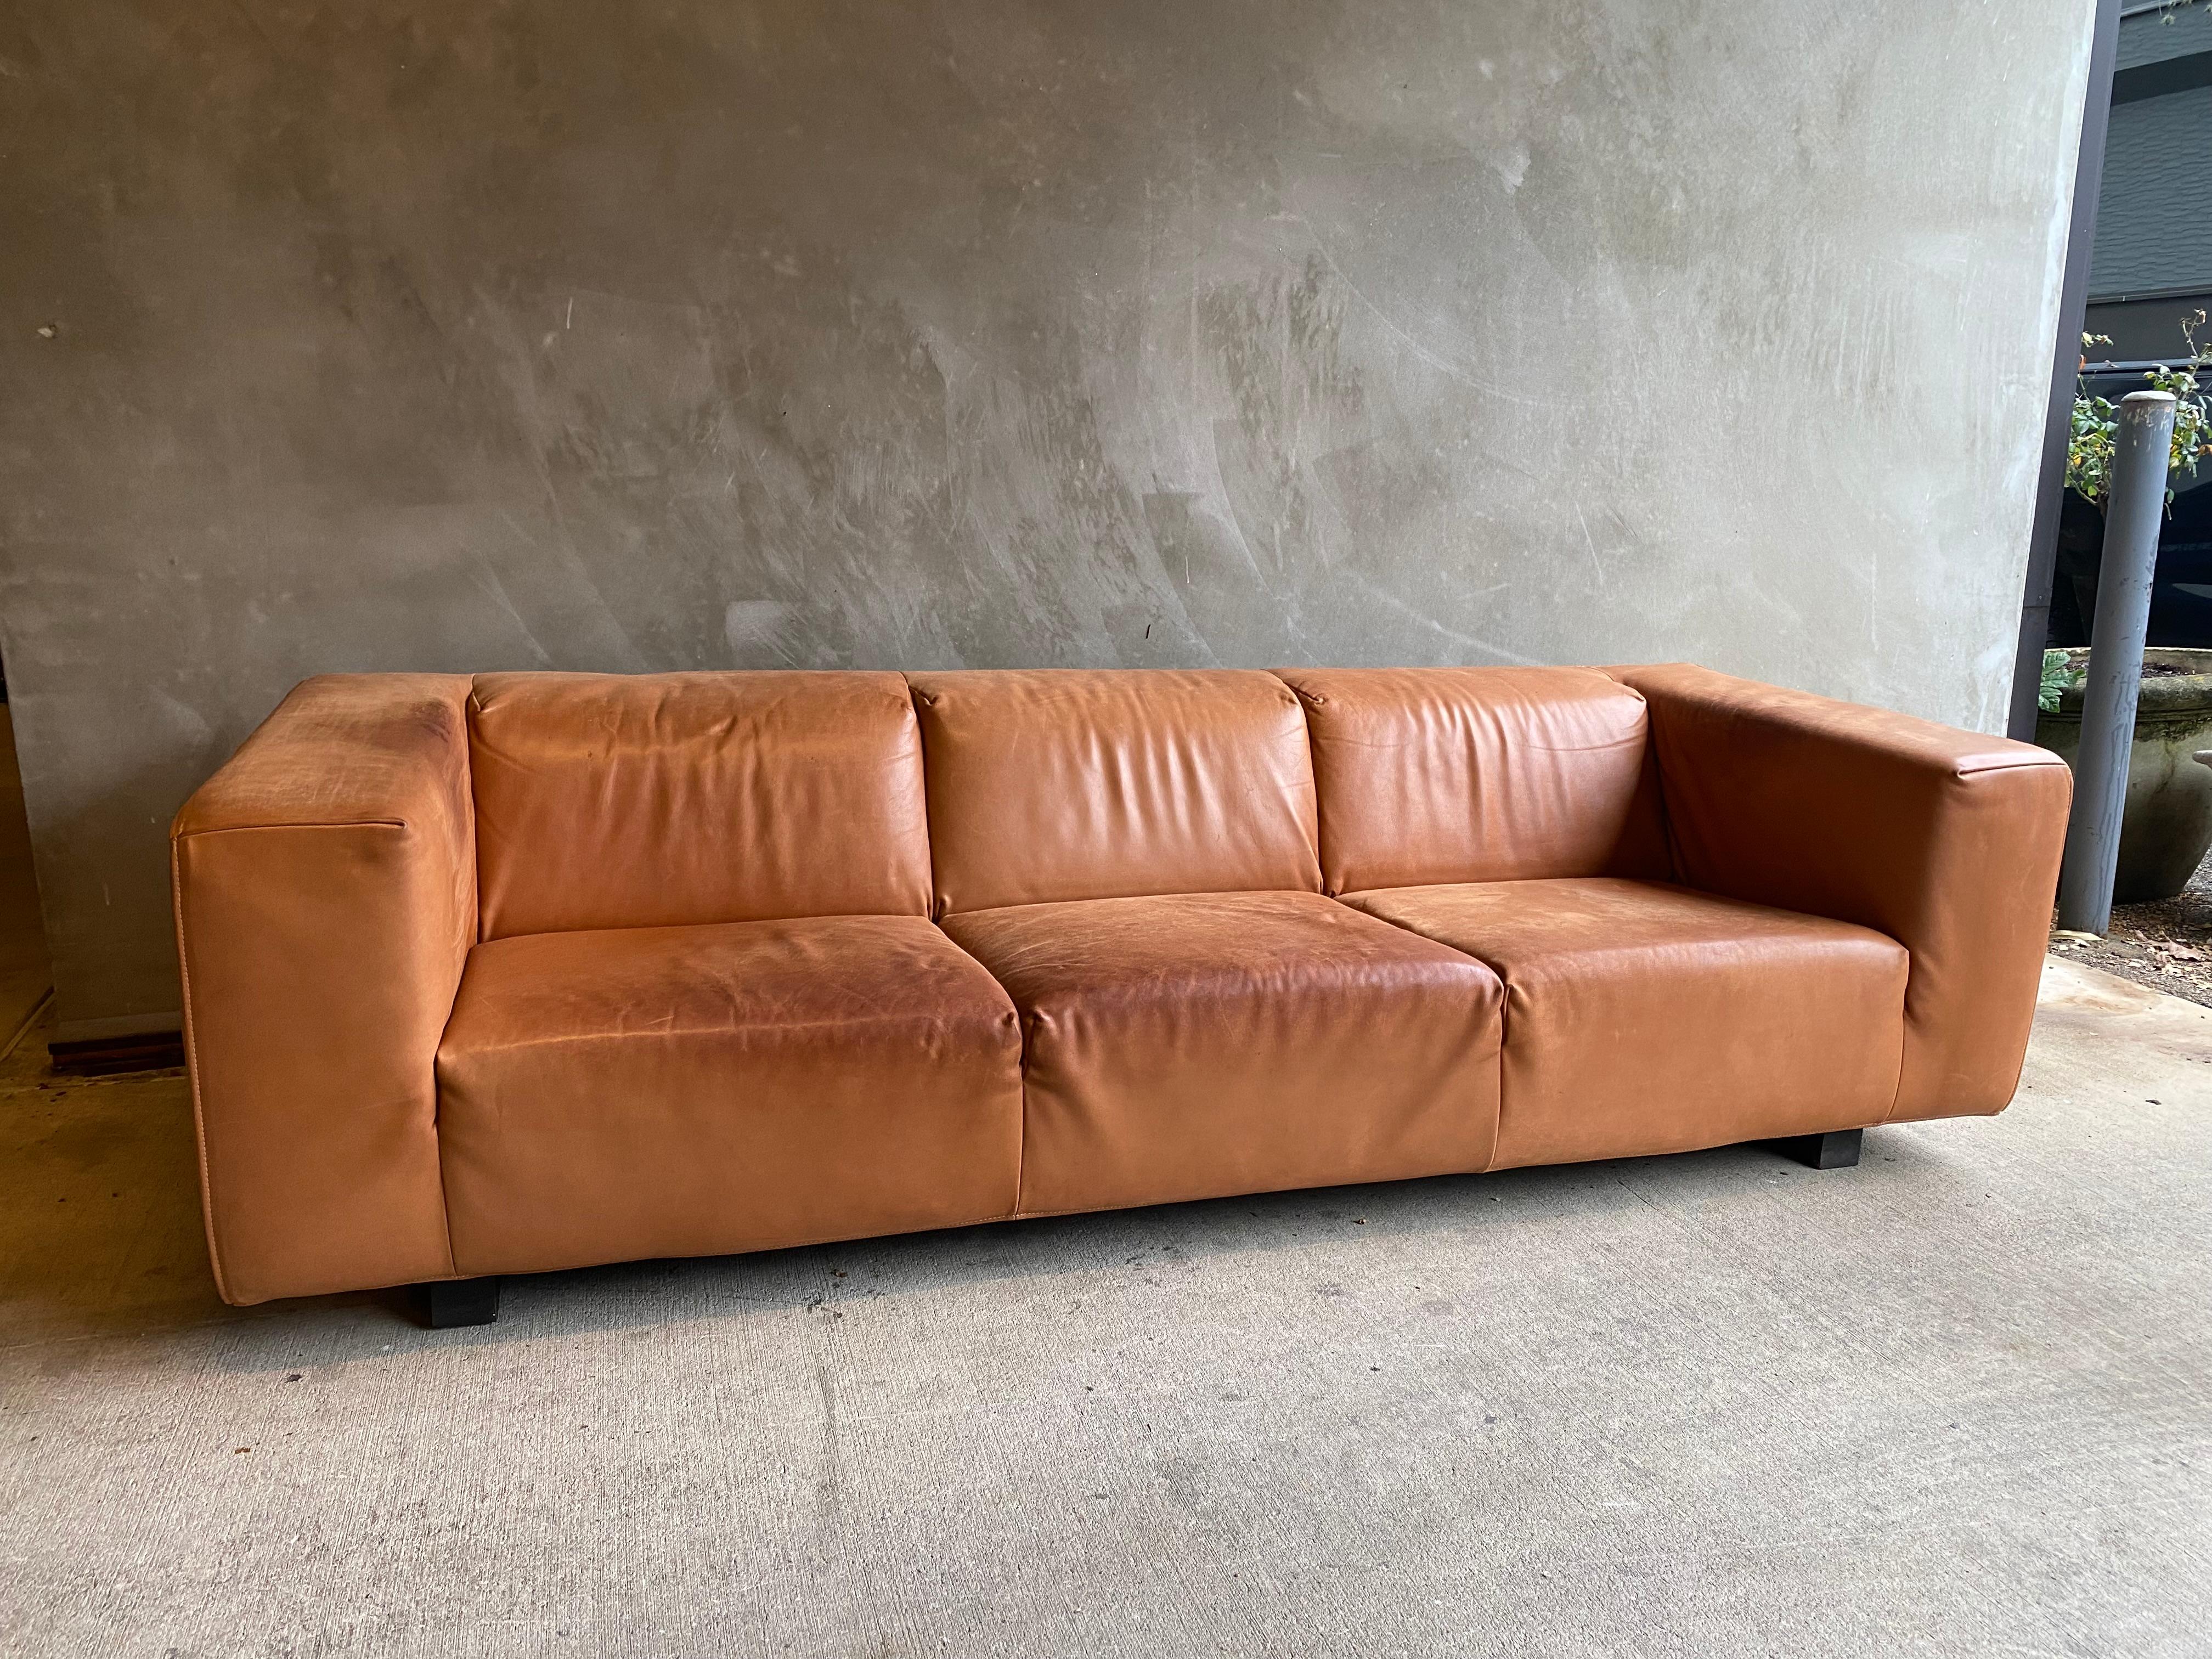 Exceptionally clean-lined vintage leather sofa of great scale and proportion in cognac leather by Dutch maker, Gerard Van Den Berg. Leather is in great condition with the perfect amount of patina. Comfortable. Netherlands, 1980's.